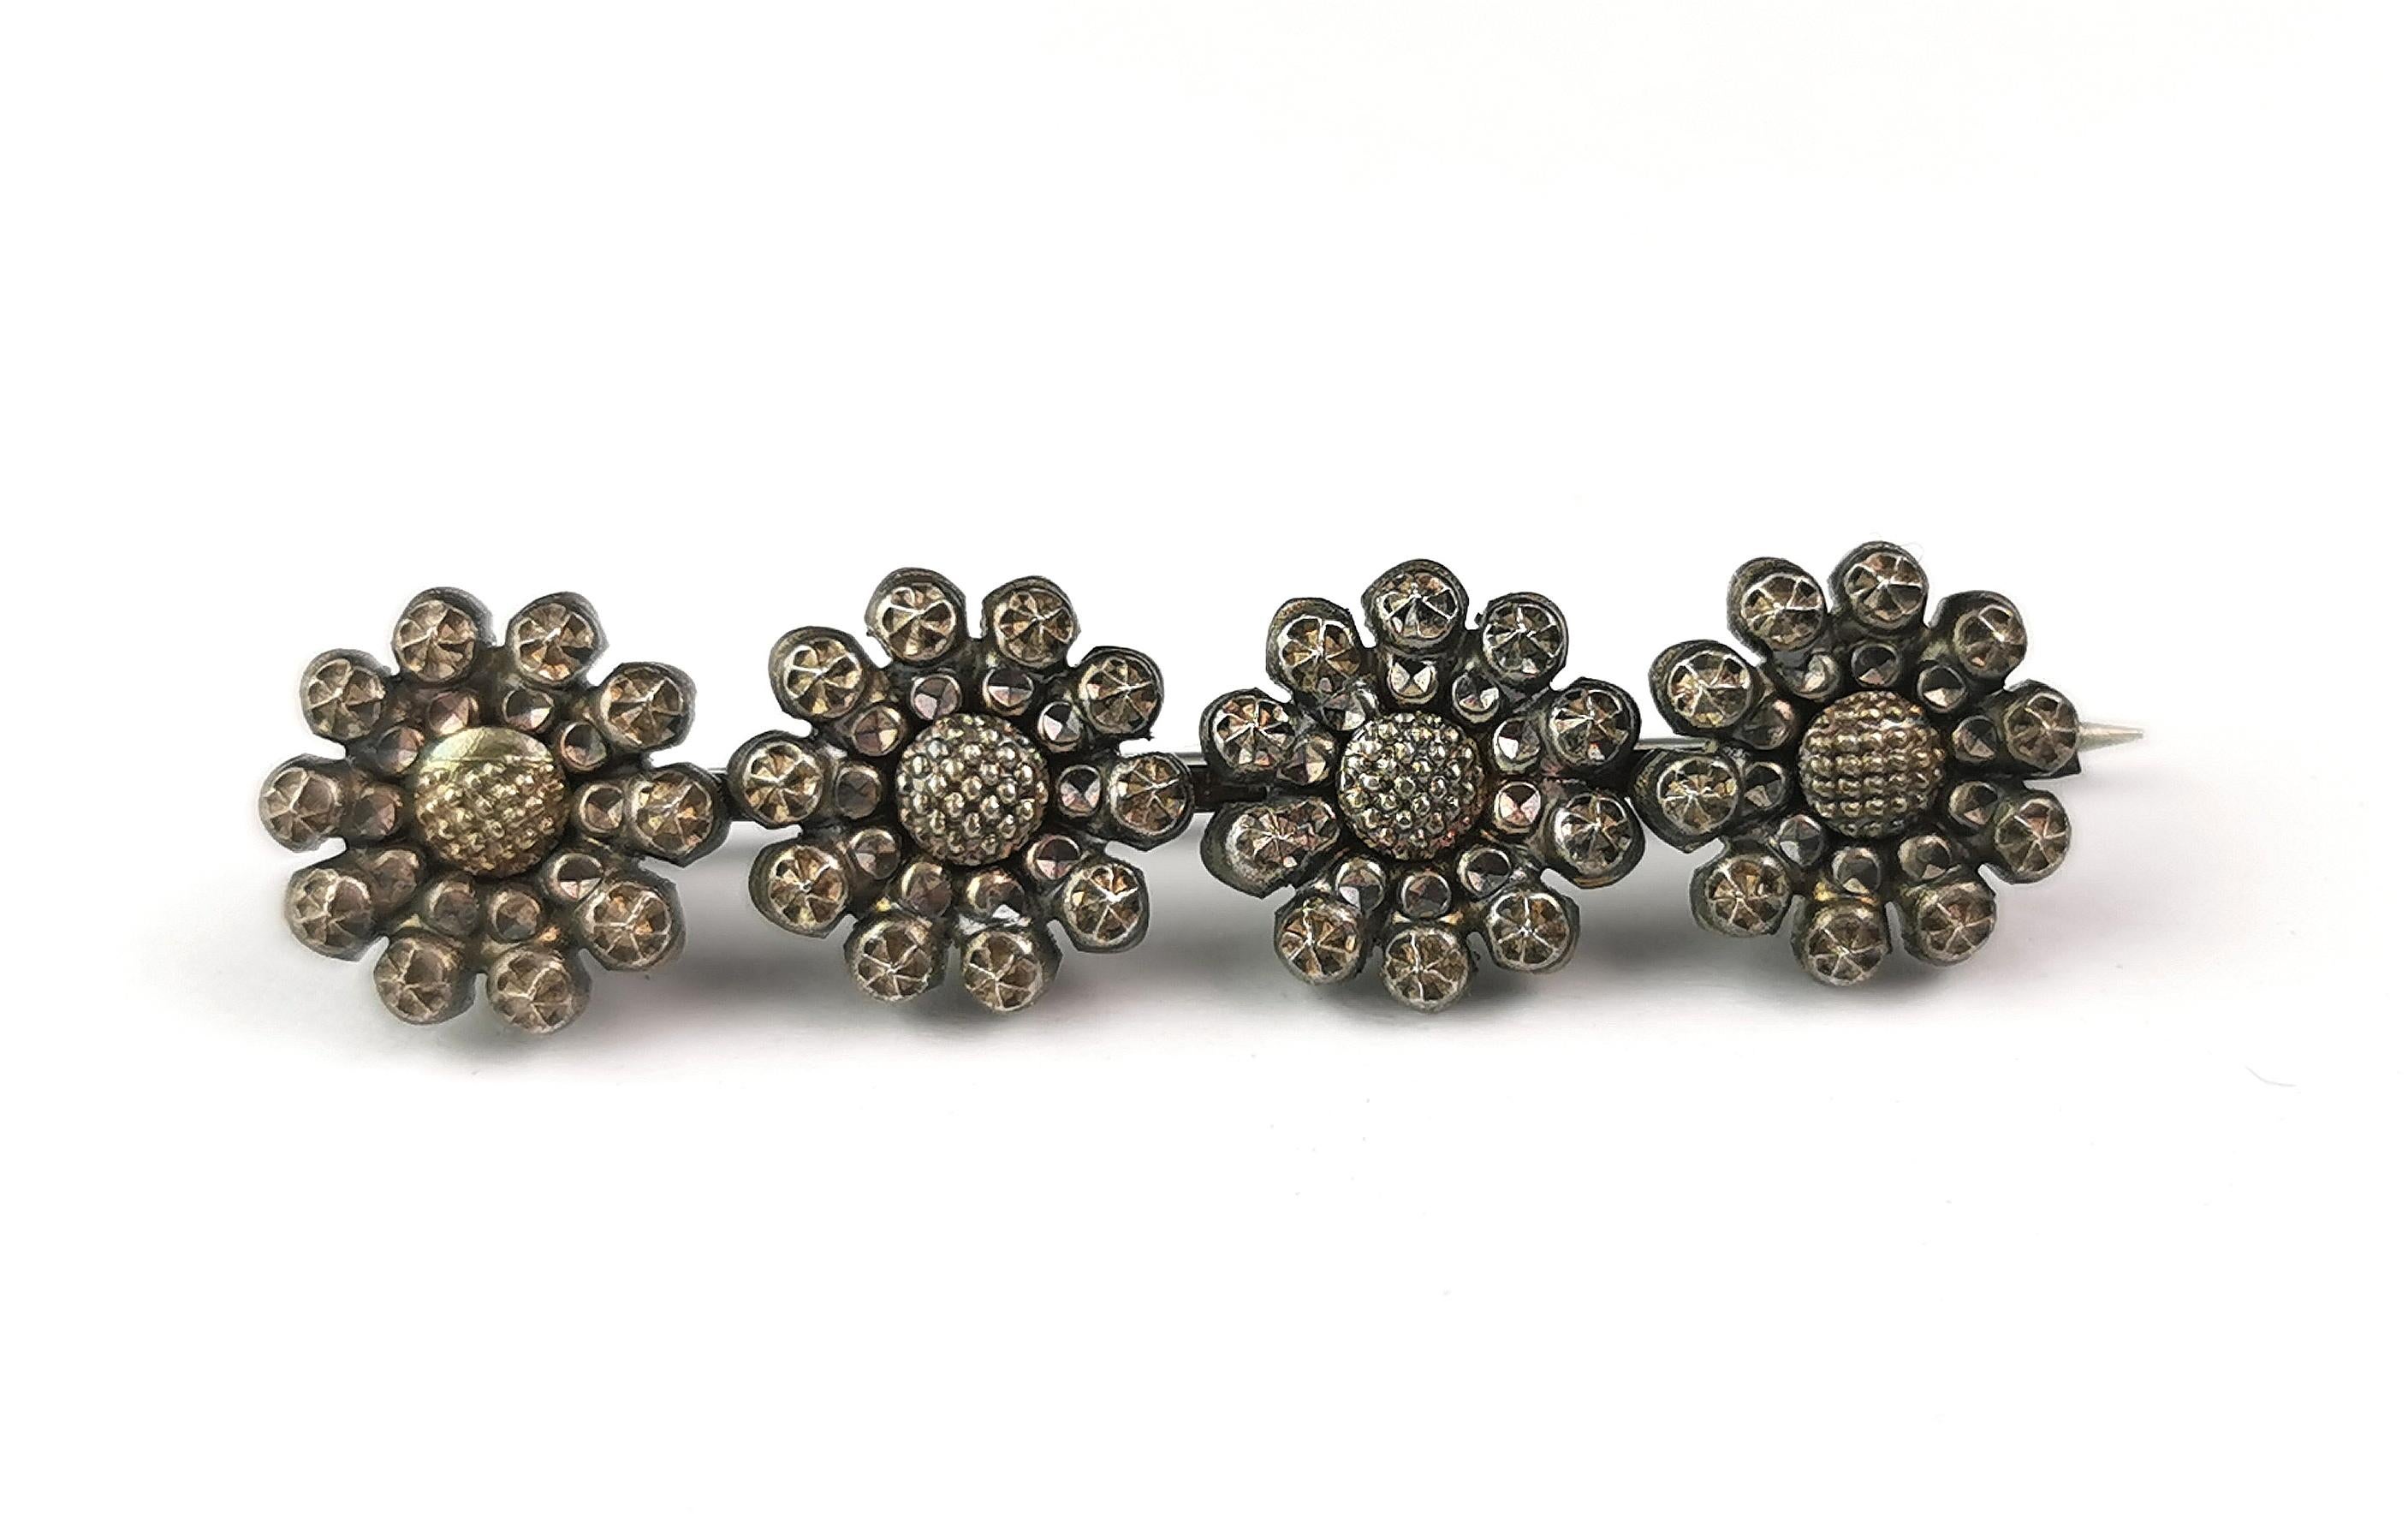 A sweet antique early Victorian era cut steel flower brooch.

It is a bar style brooch and could be used as a cravat or tie pin, it features a row of four individual cut steel flowers each with plenty of detail.

The flowers look like daisies.

It